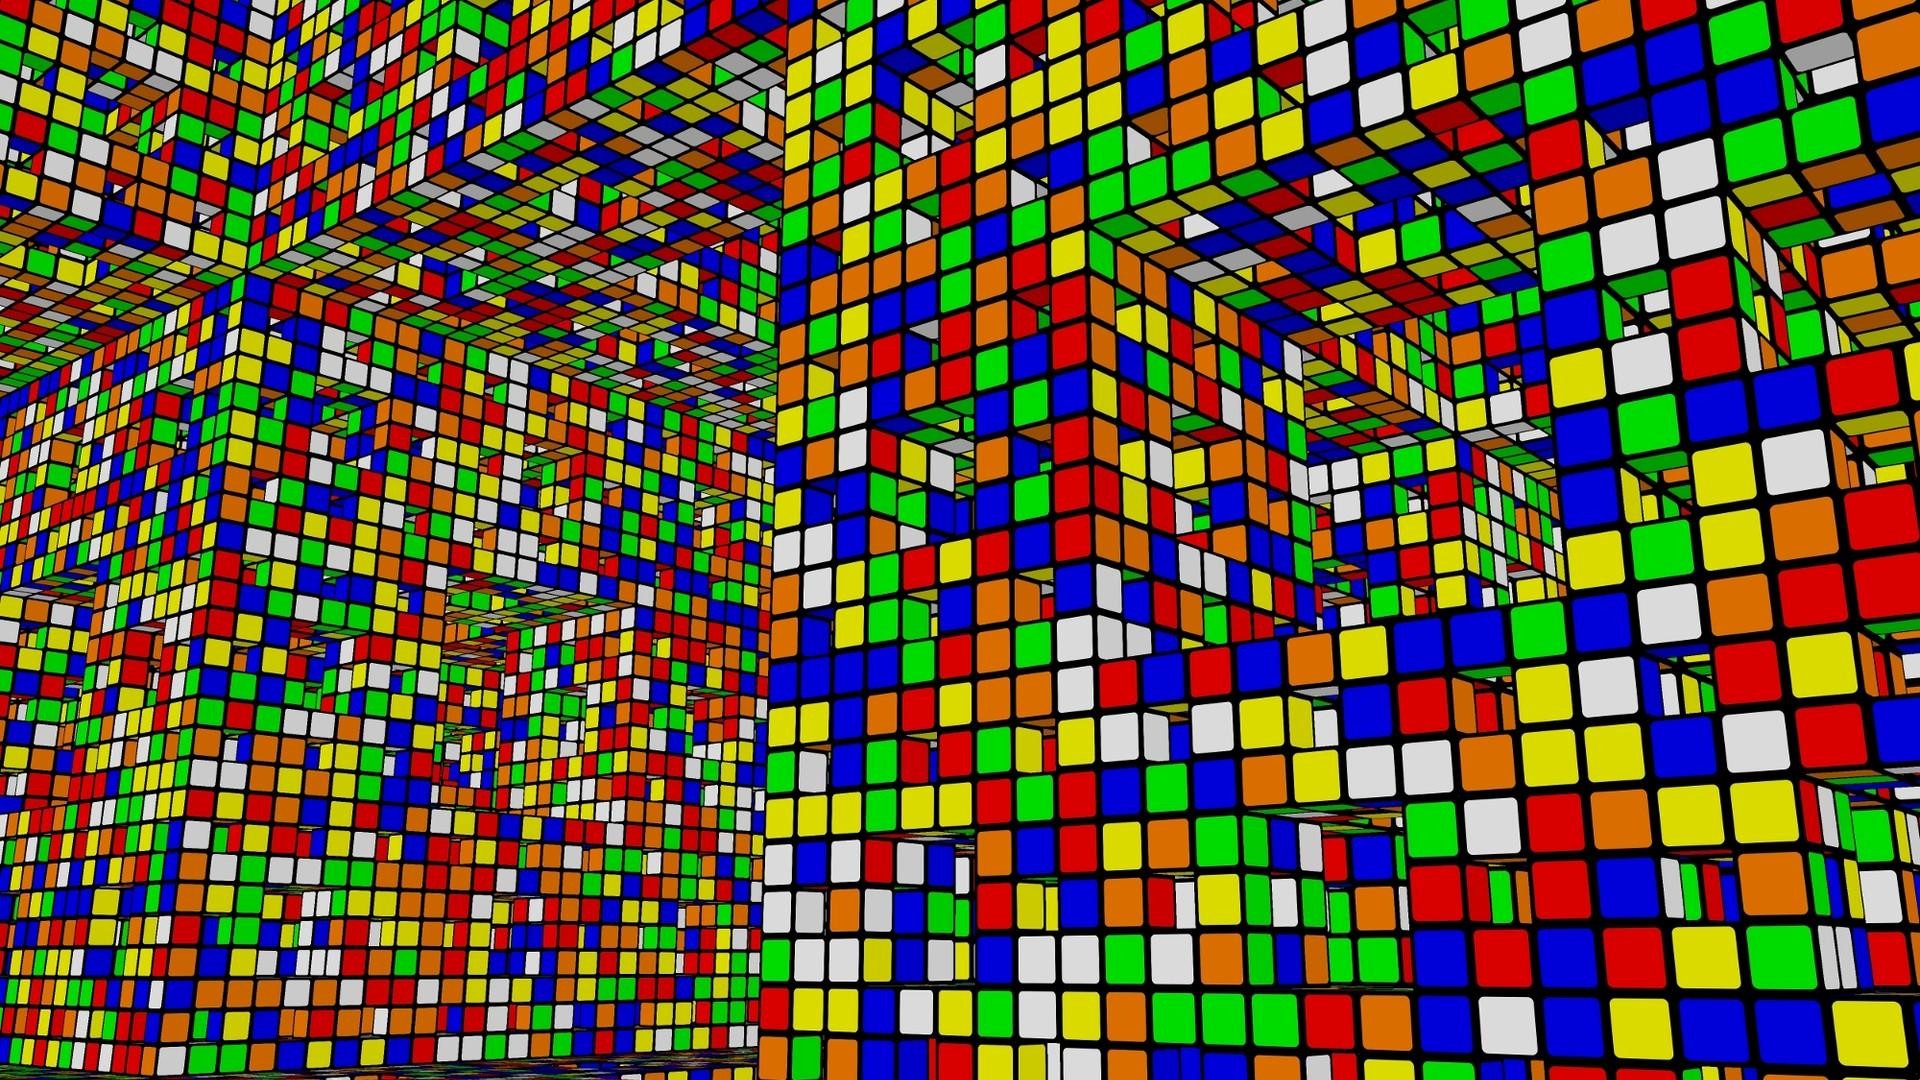 Multicolored-tetris-game-HD-abstract-1920×1080-Free-Image-